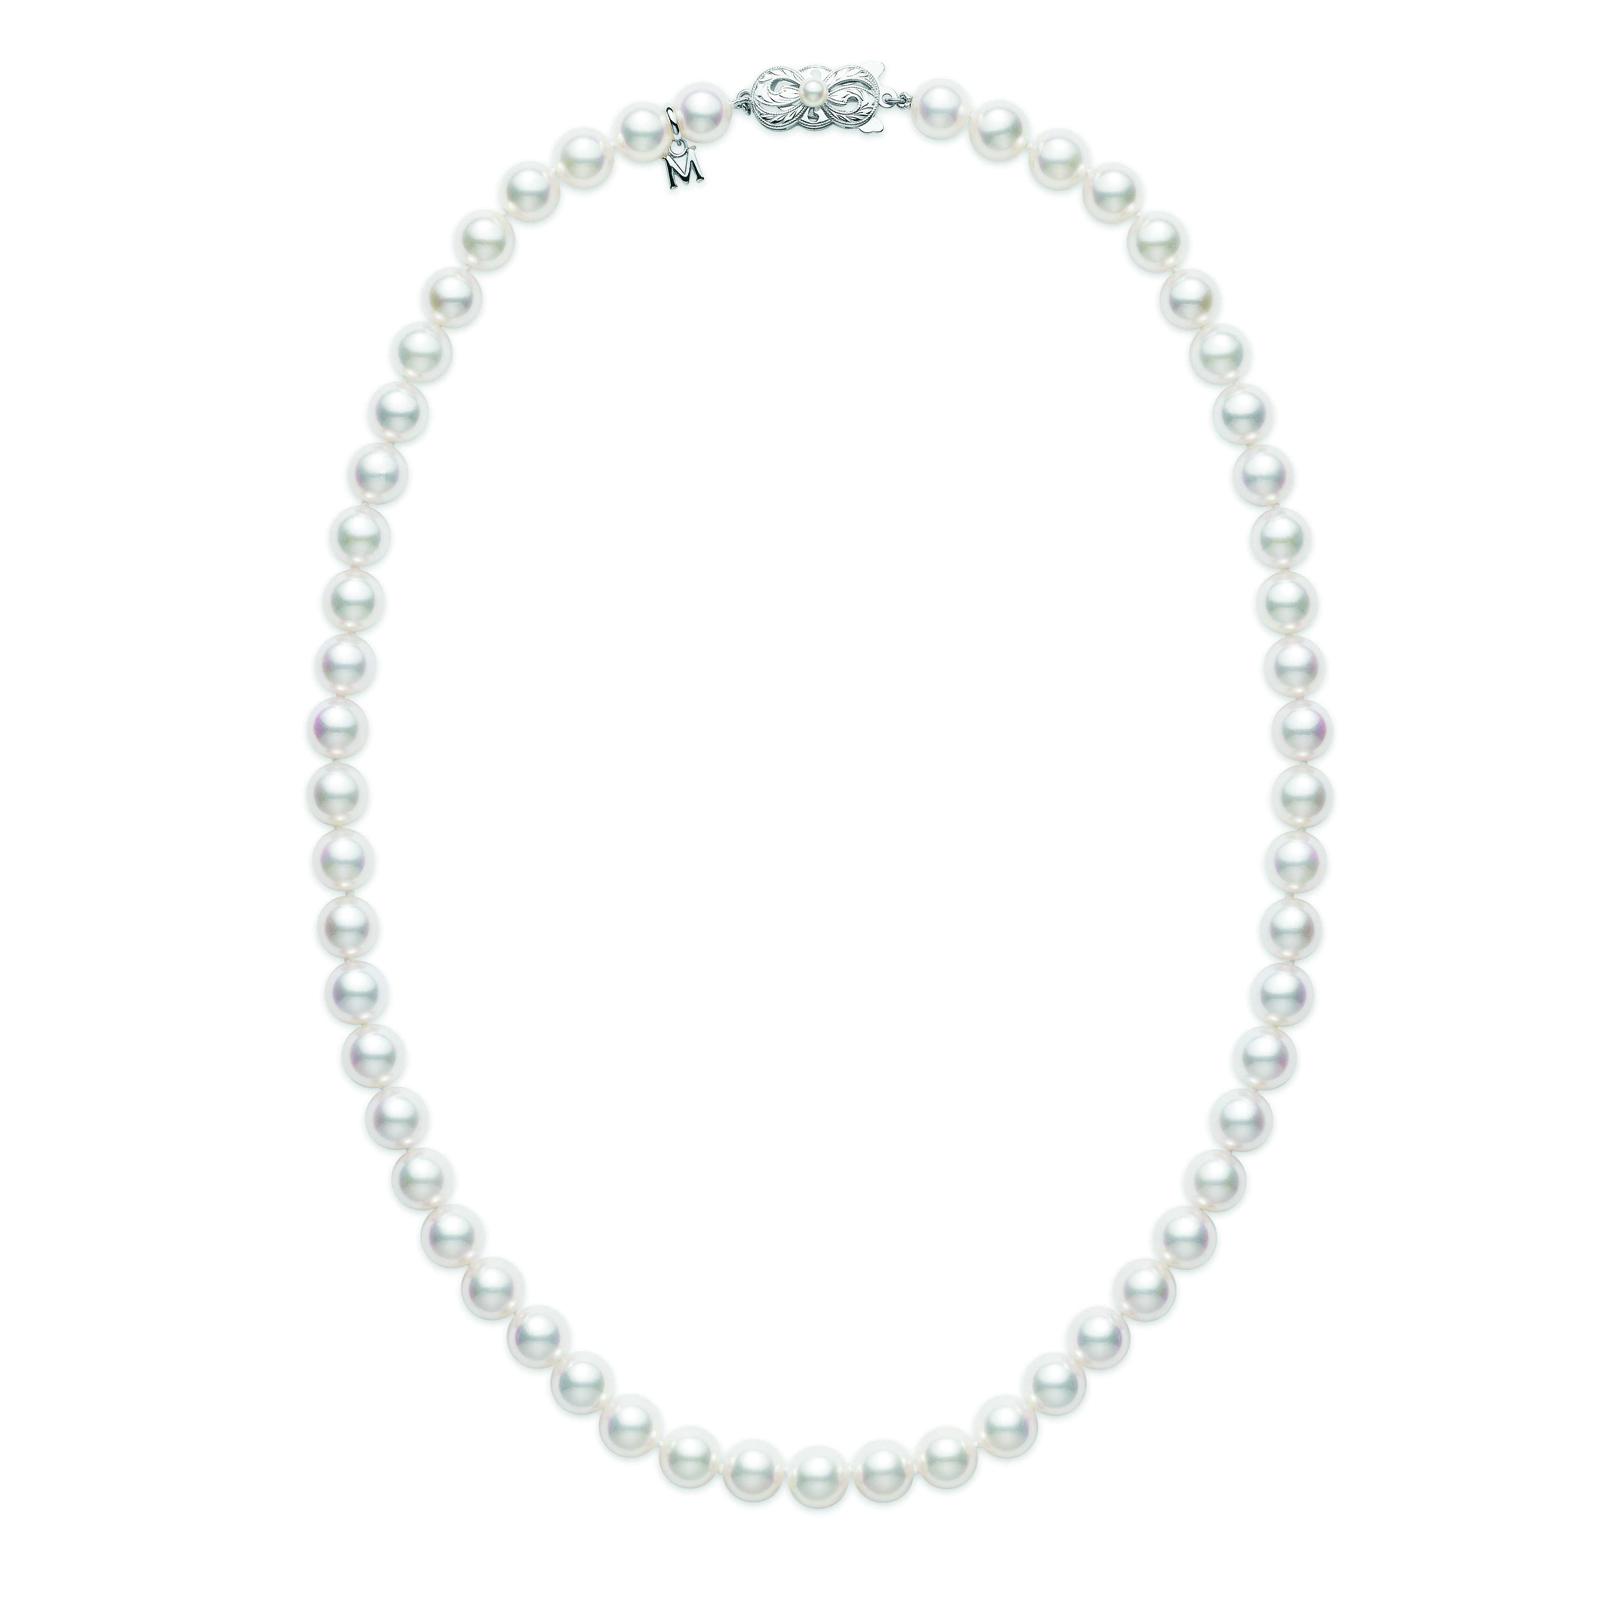 Mikimoto Princess Length Pearl Strand Necklace, 18 inches